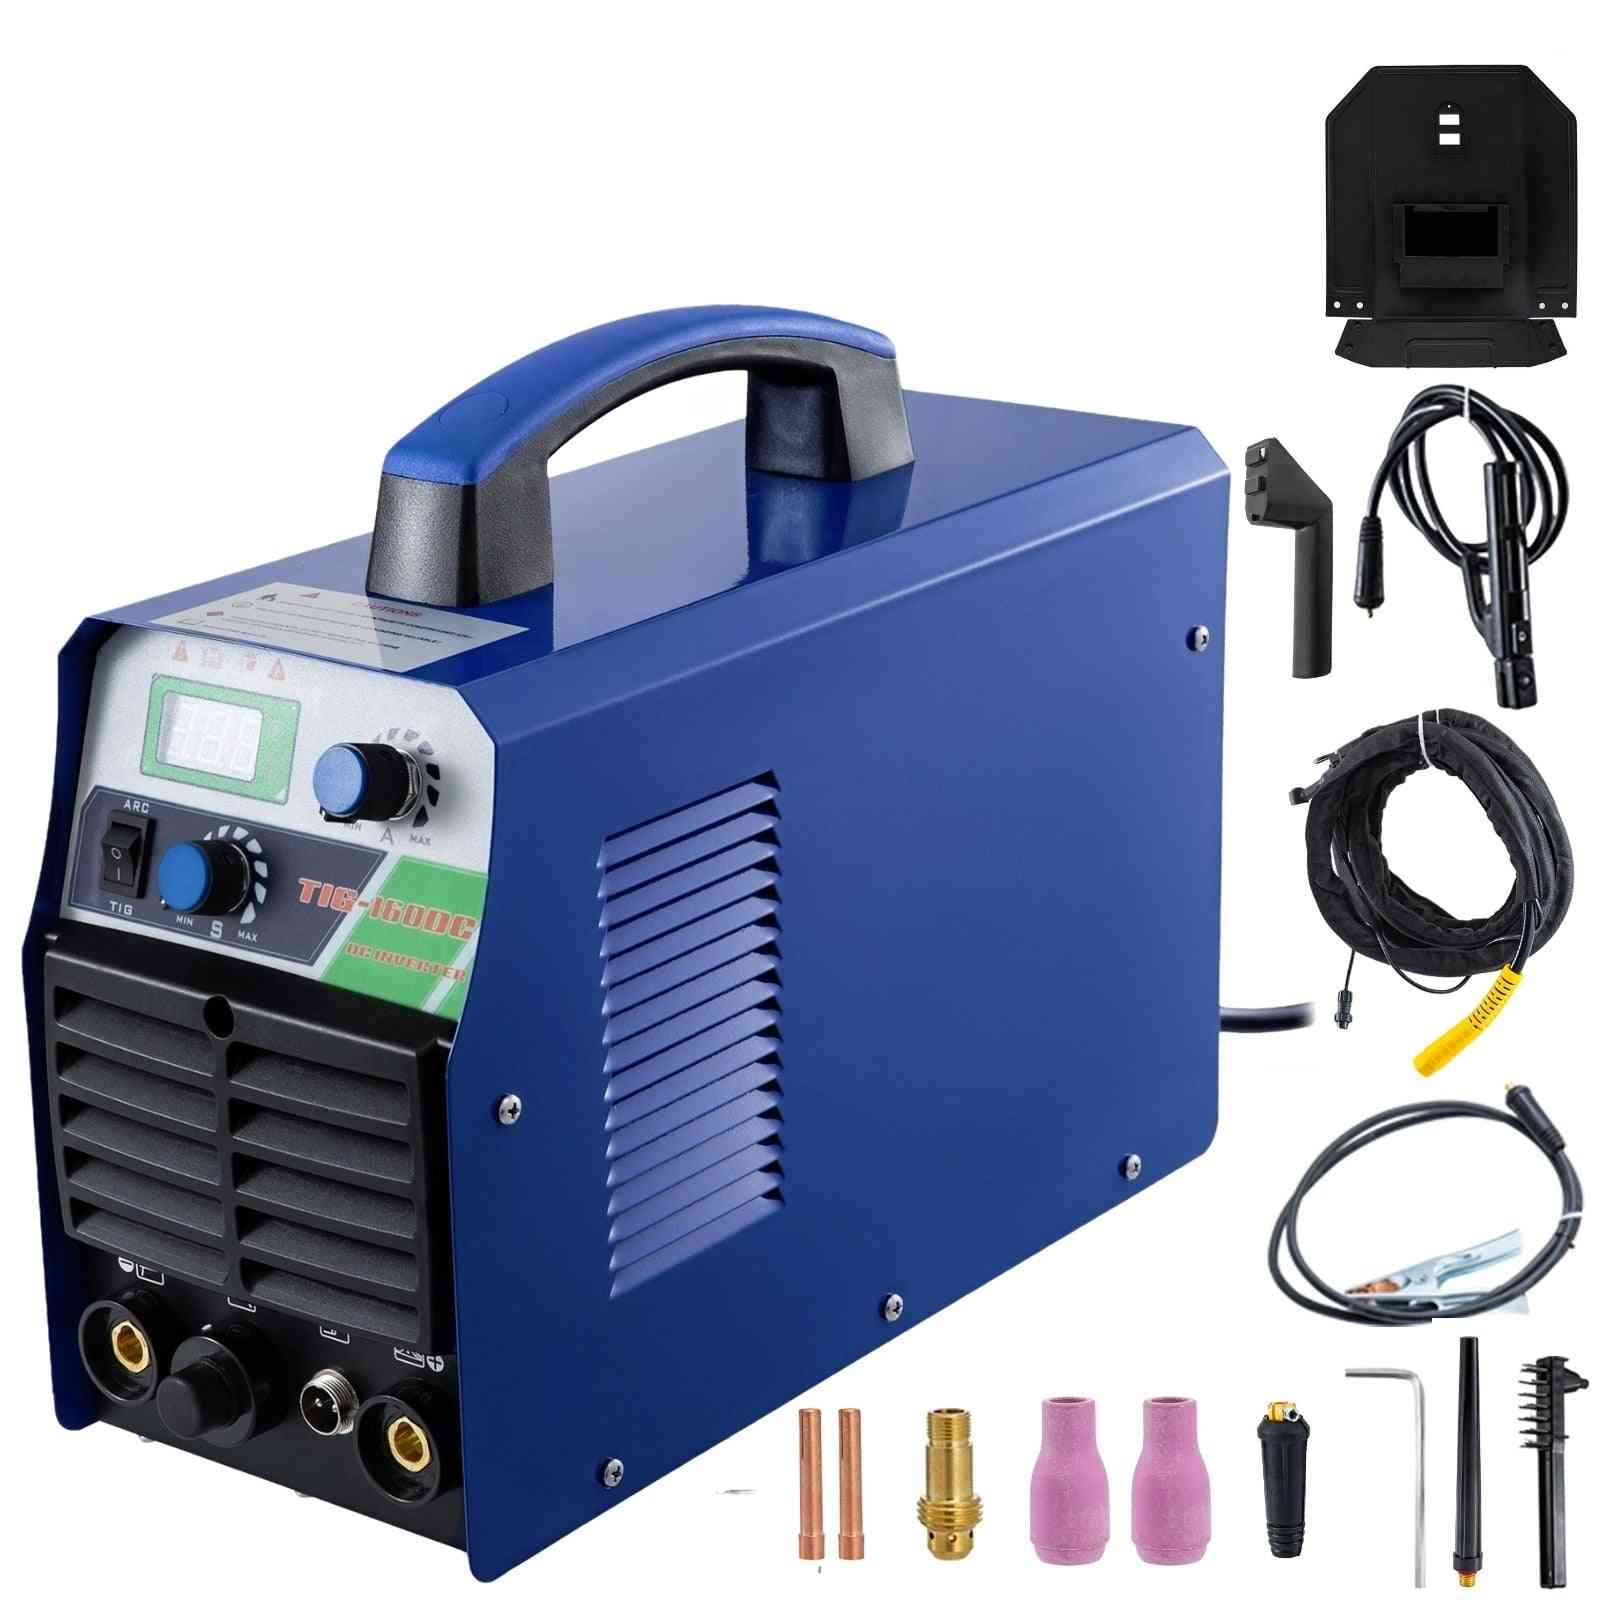 Dual Voltage Welding Machine With Full Accessories